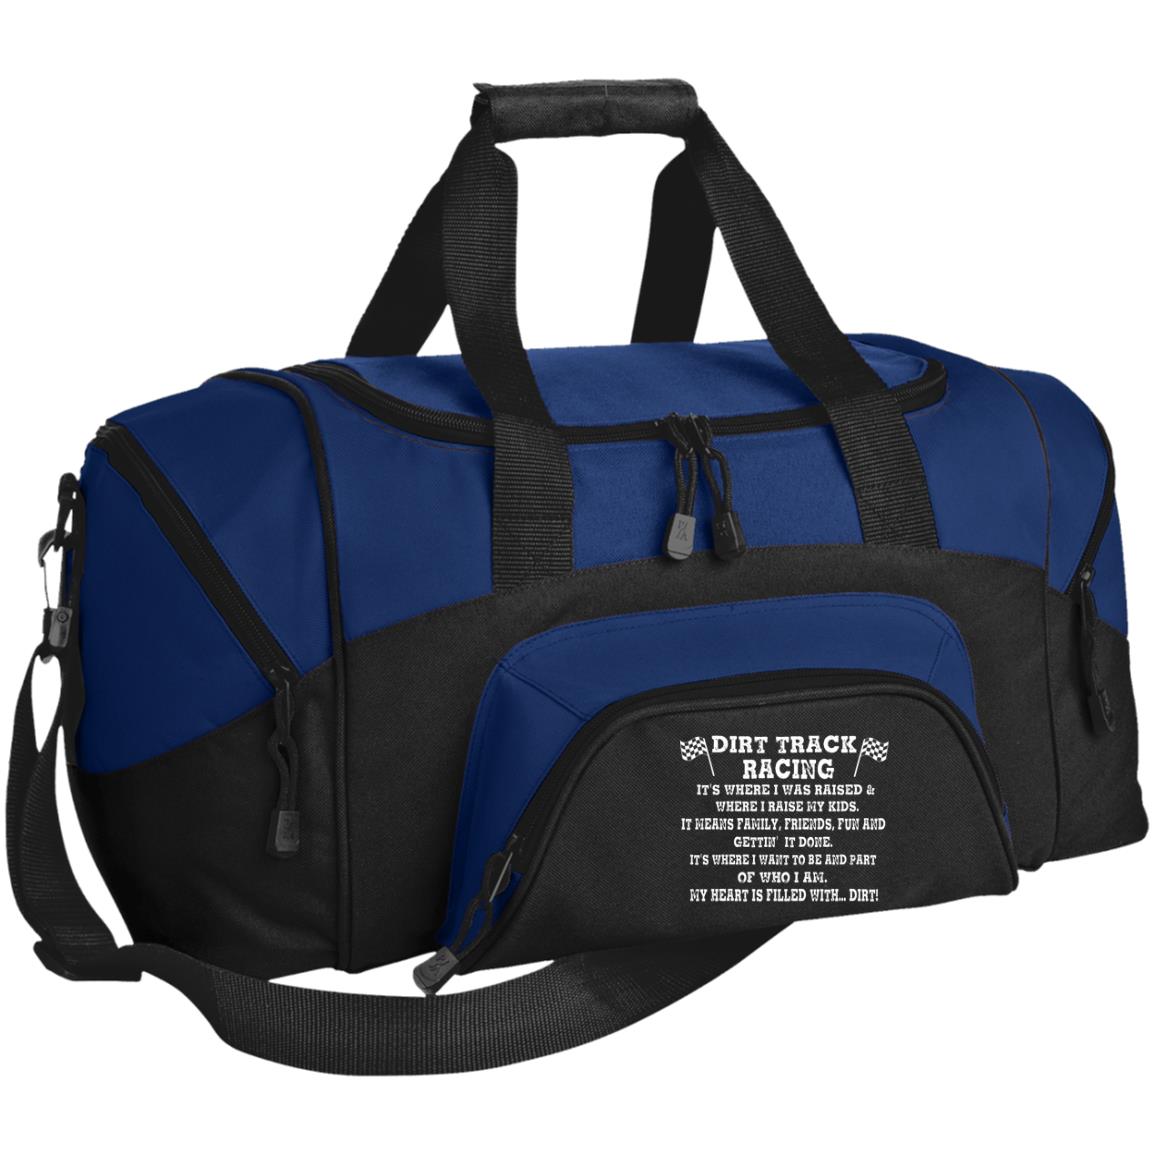 Dirt Track Racing It's Where I Was Raised Small Colorblock Sport Duffel Bag